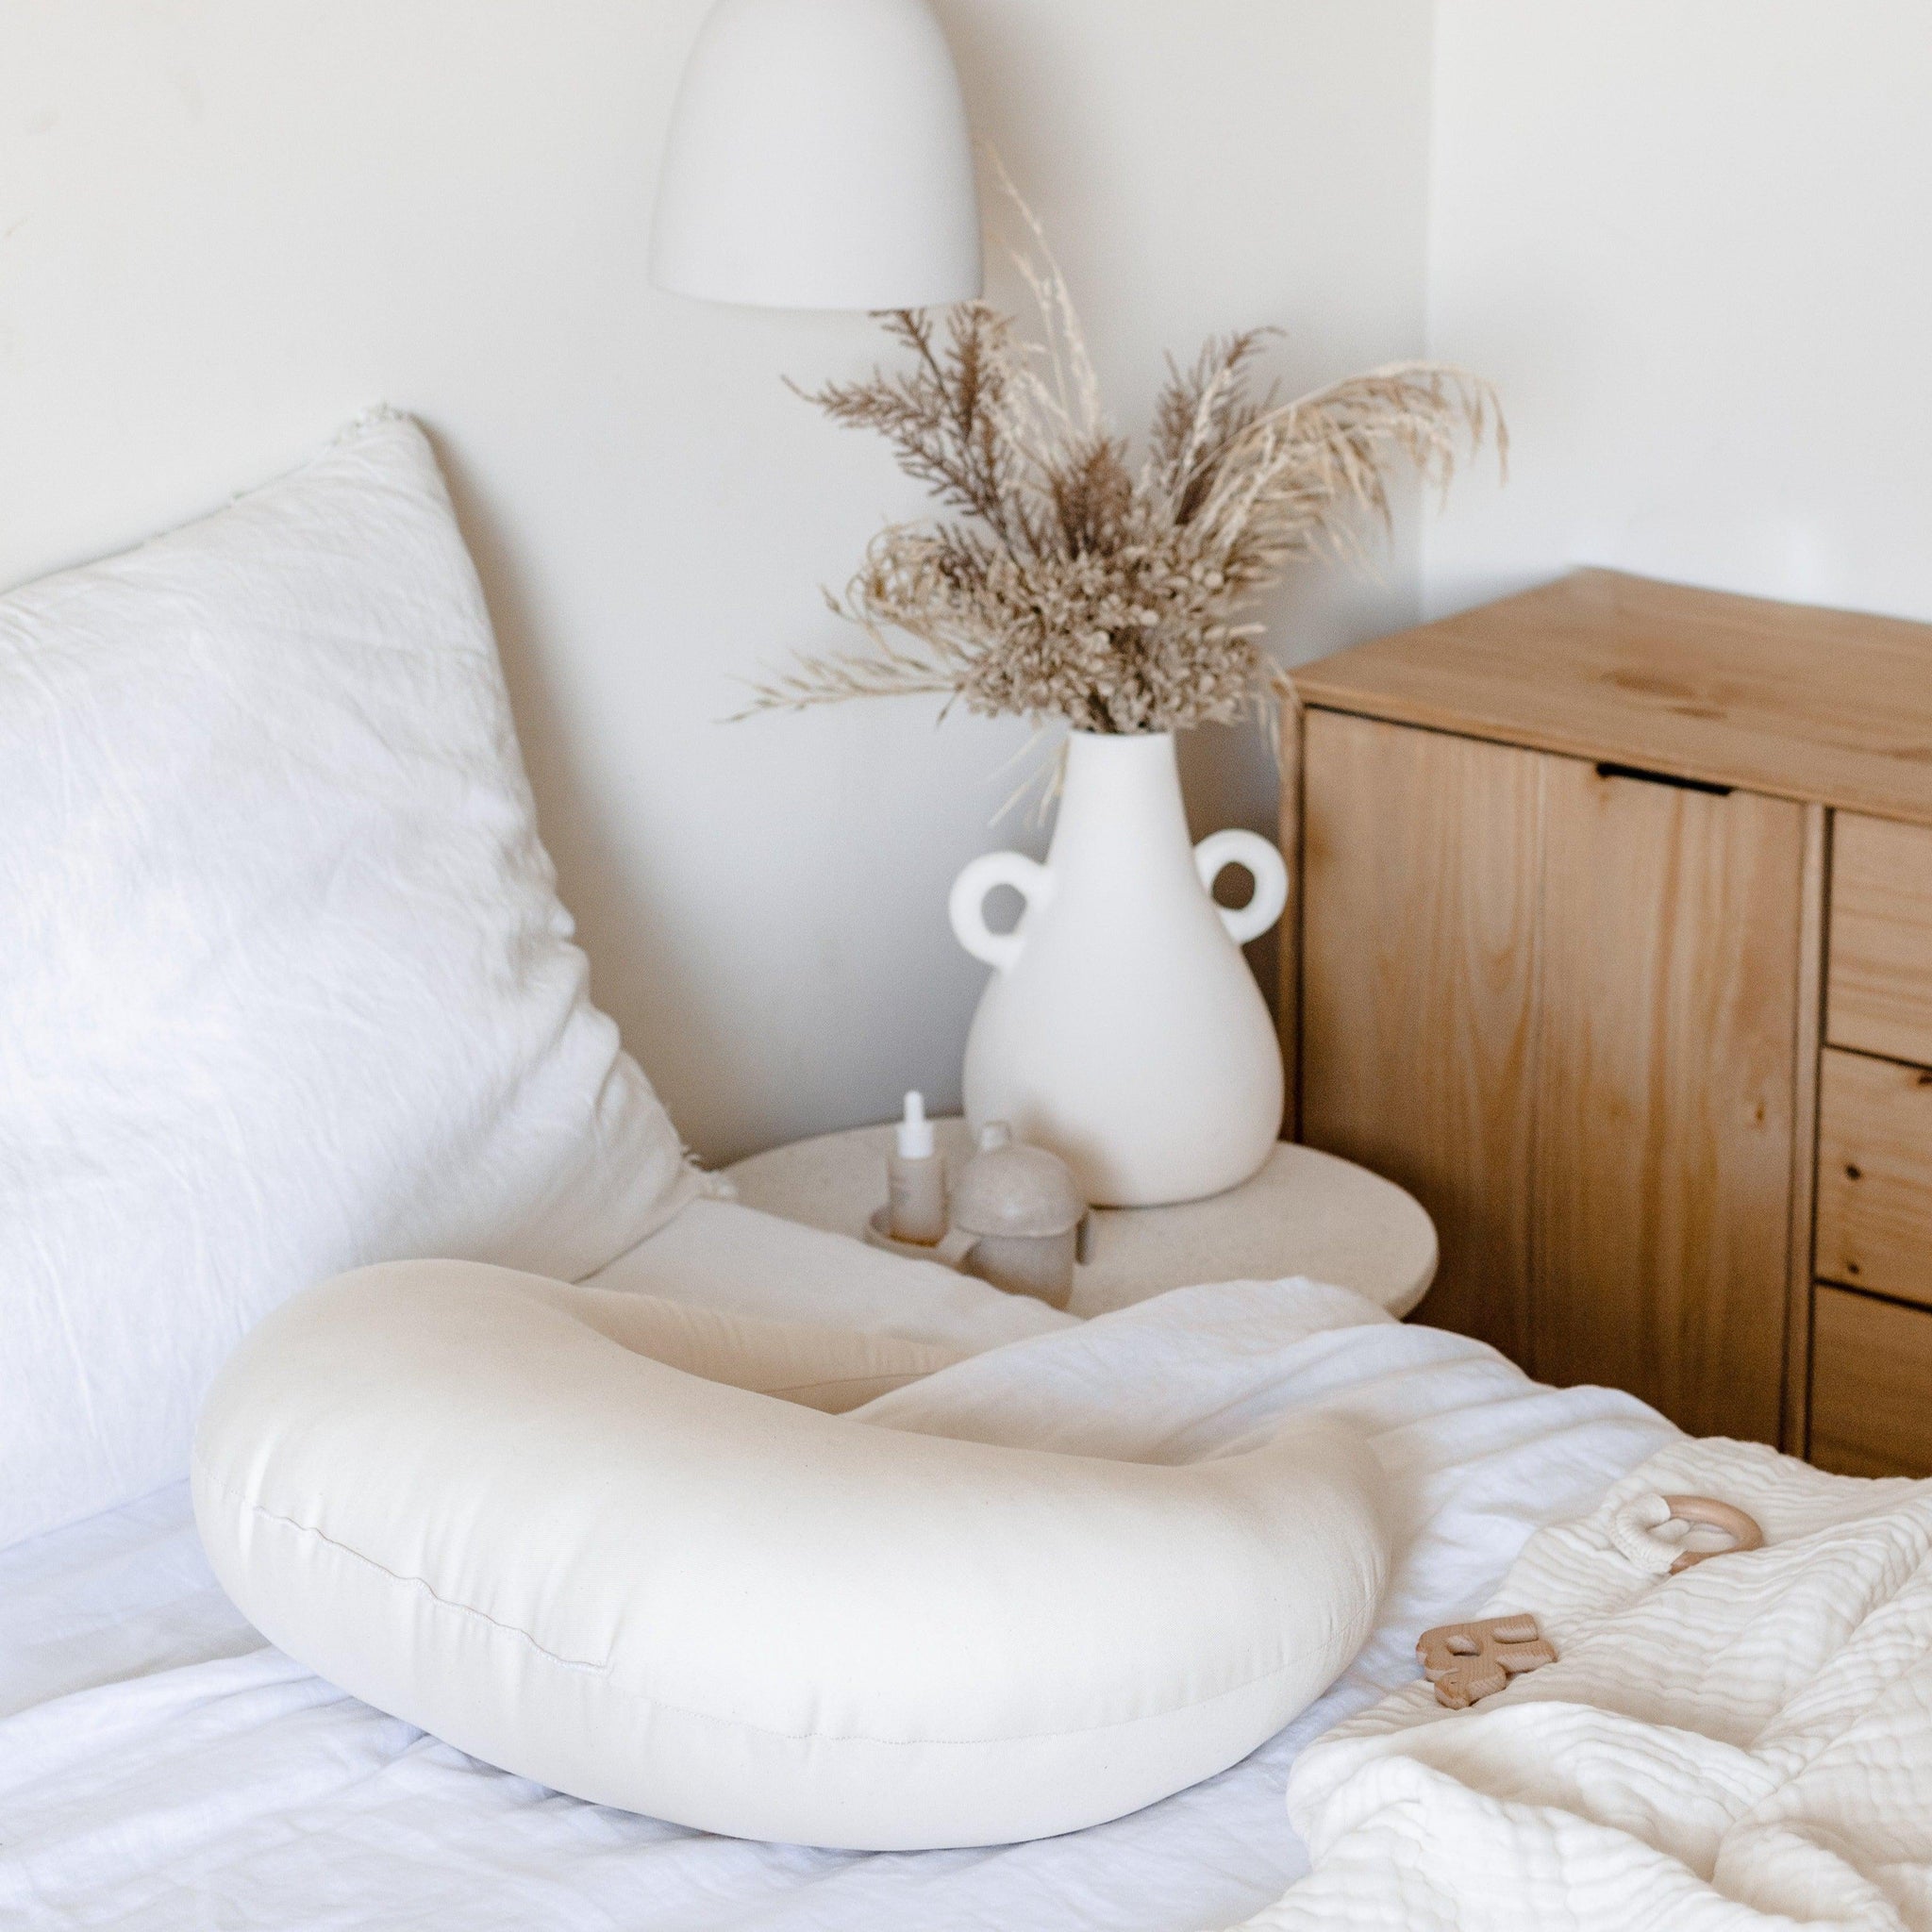 A white bed with a PREORDER Feeding & Support Pillow | Natural by Snuggle Me on it, perfect for snuggling and feeding.